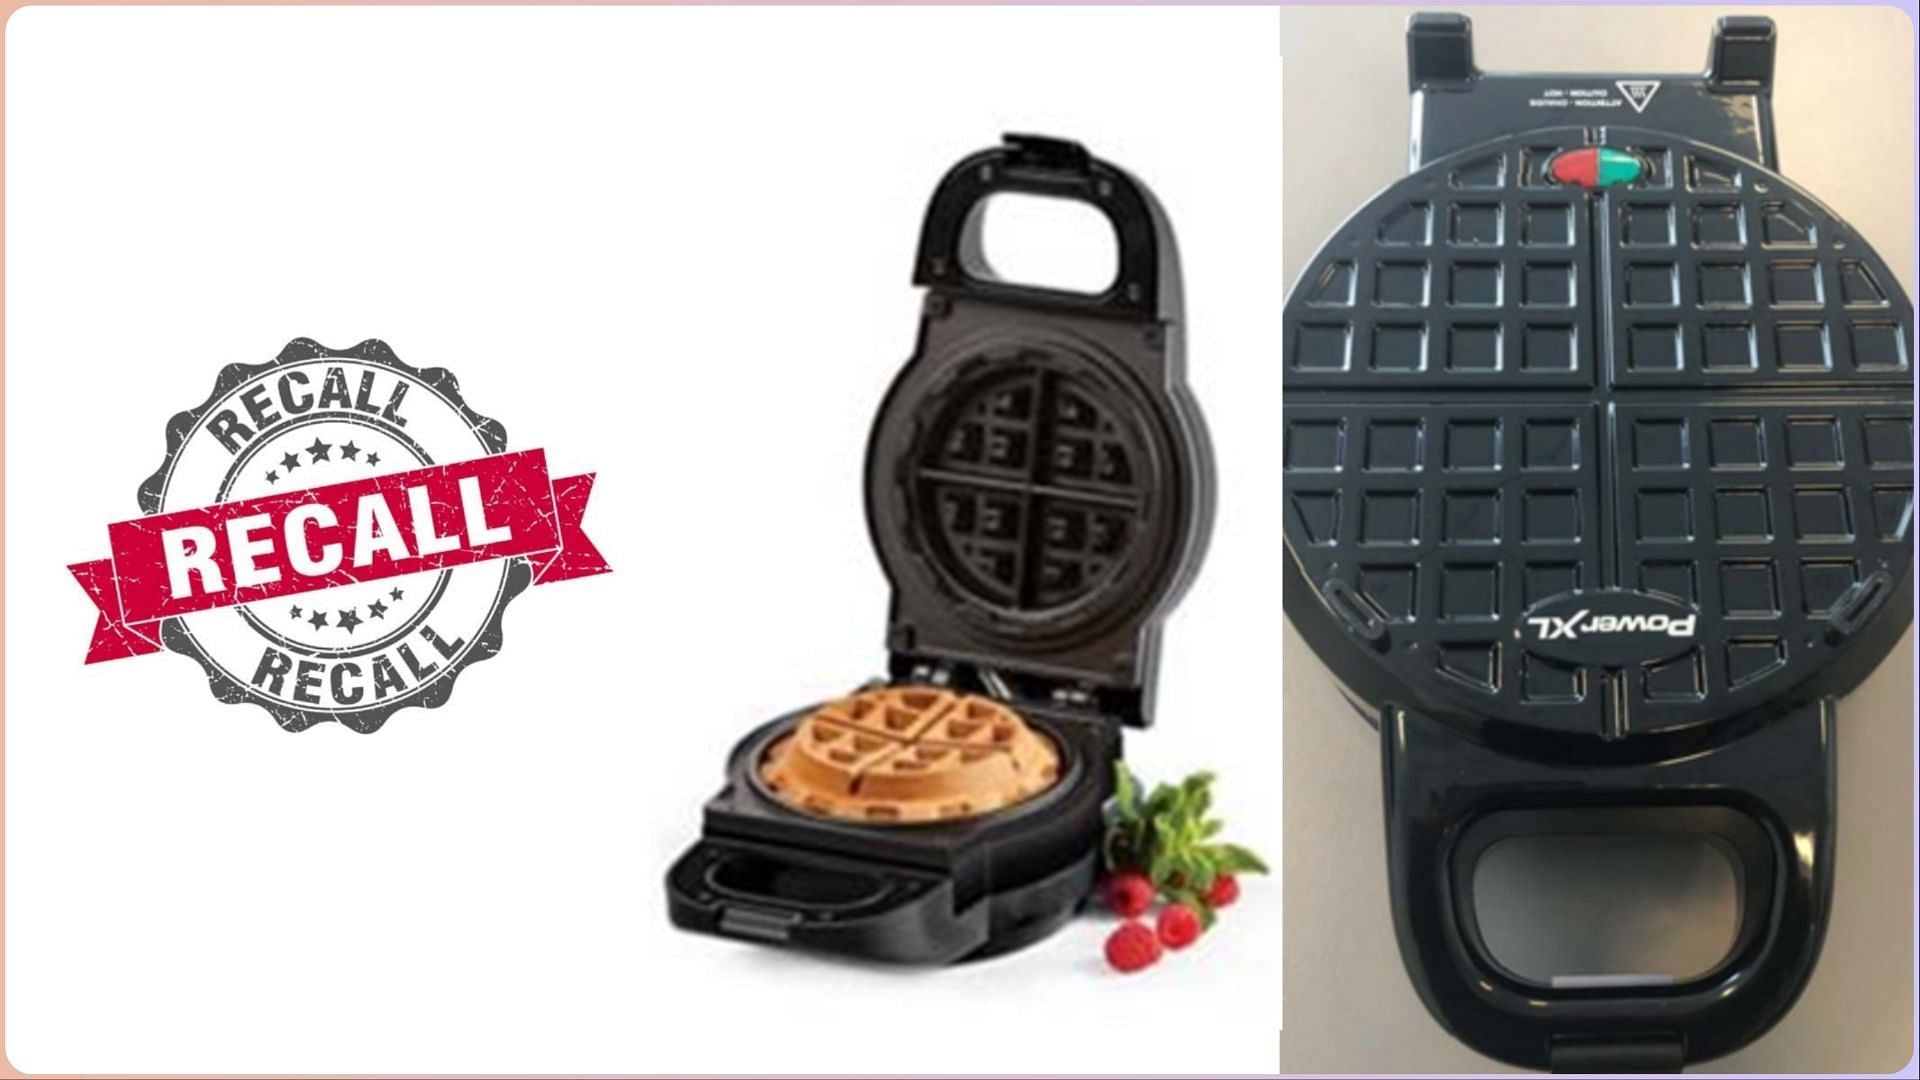 Over 450,000 PowerXL Stuffed Wafflizer waffle makers recalled over burn hazard concerns (Image via CPSC/Health Canada)